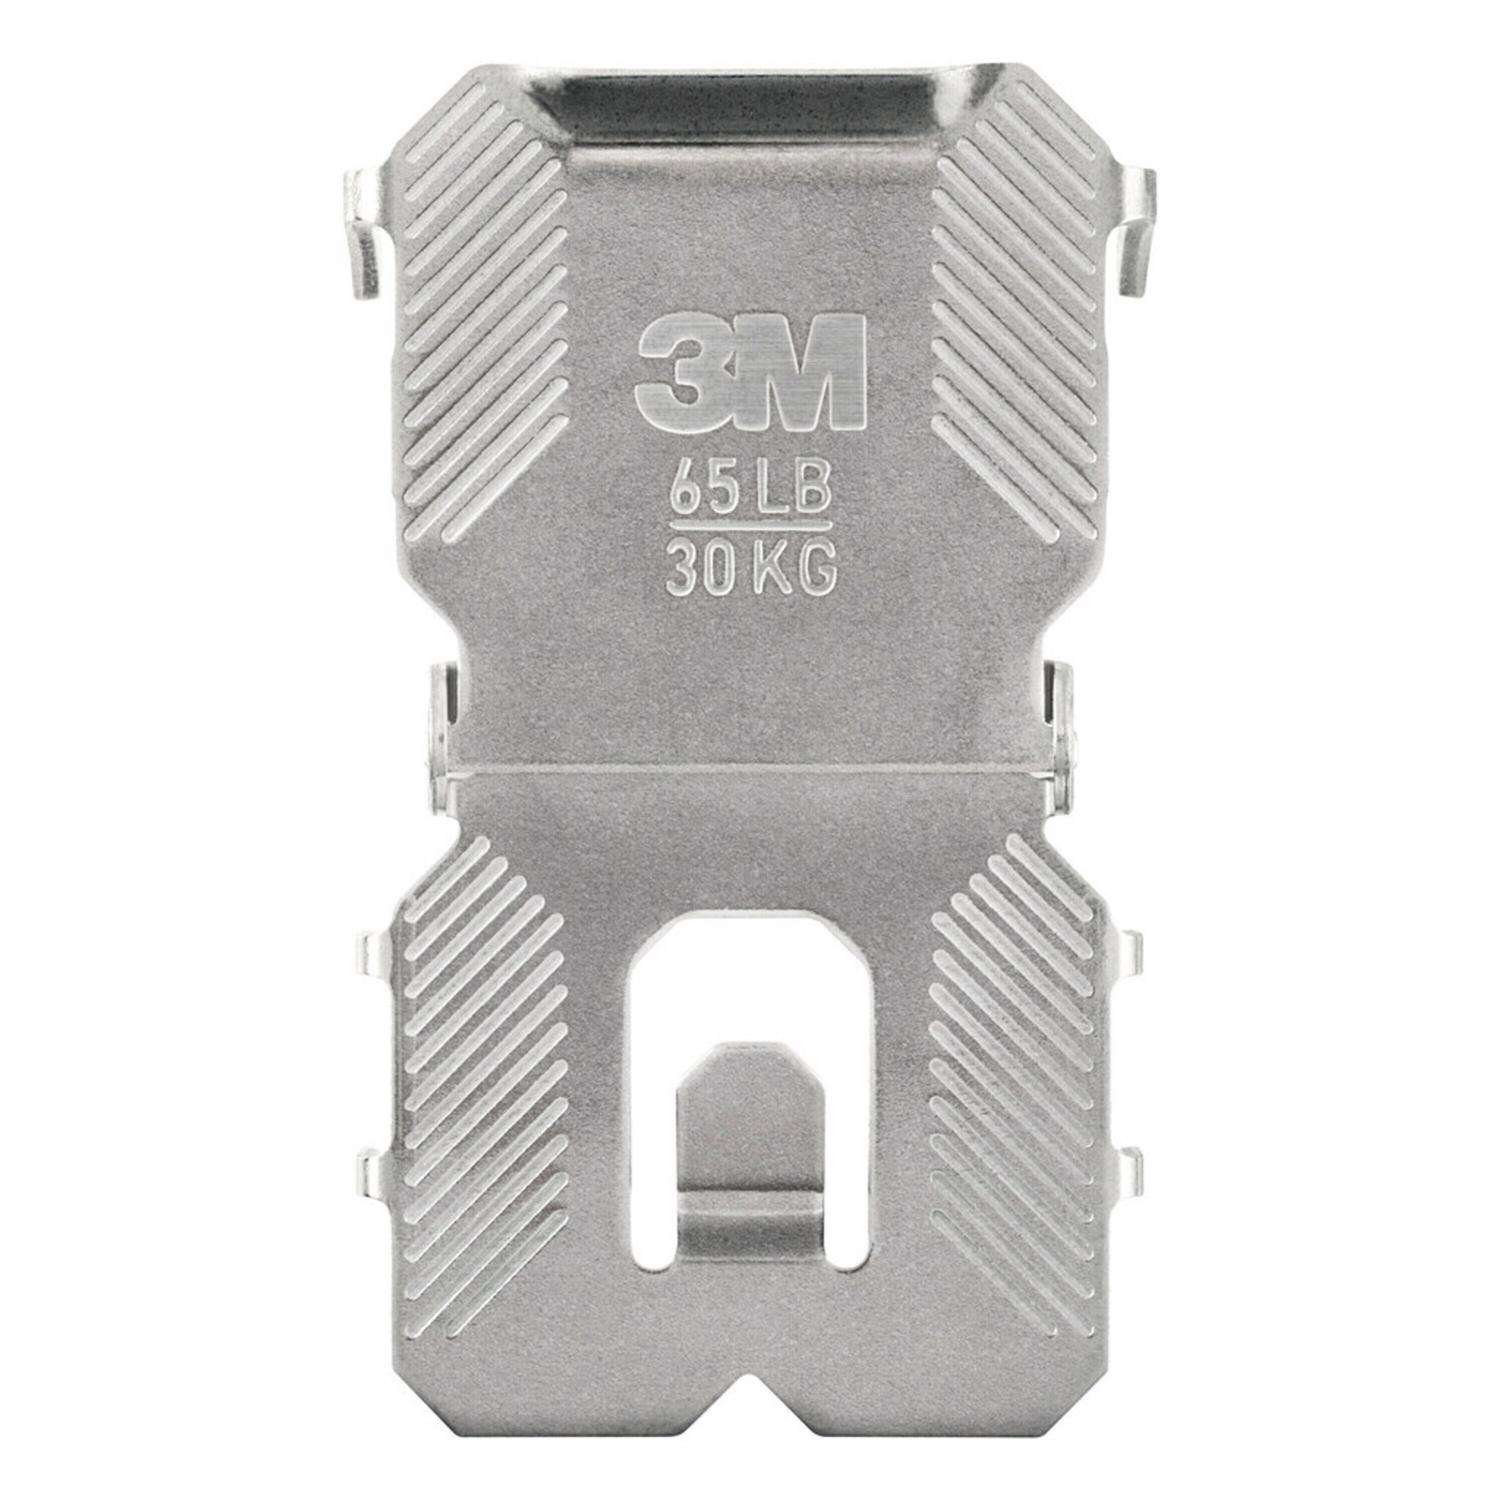 3M Claw Drywall Picture Hanger - 65 lb (Mmm3Ph65M2Es)